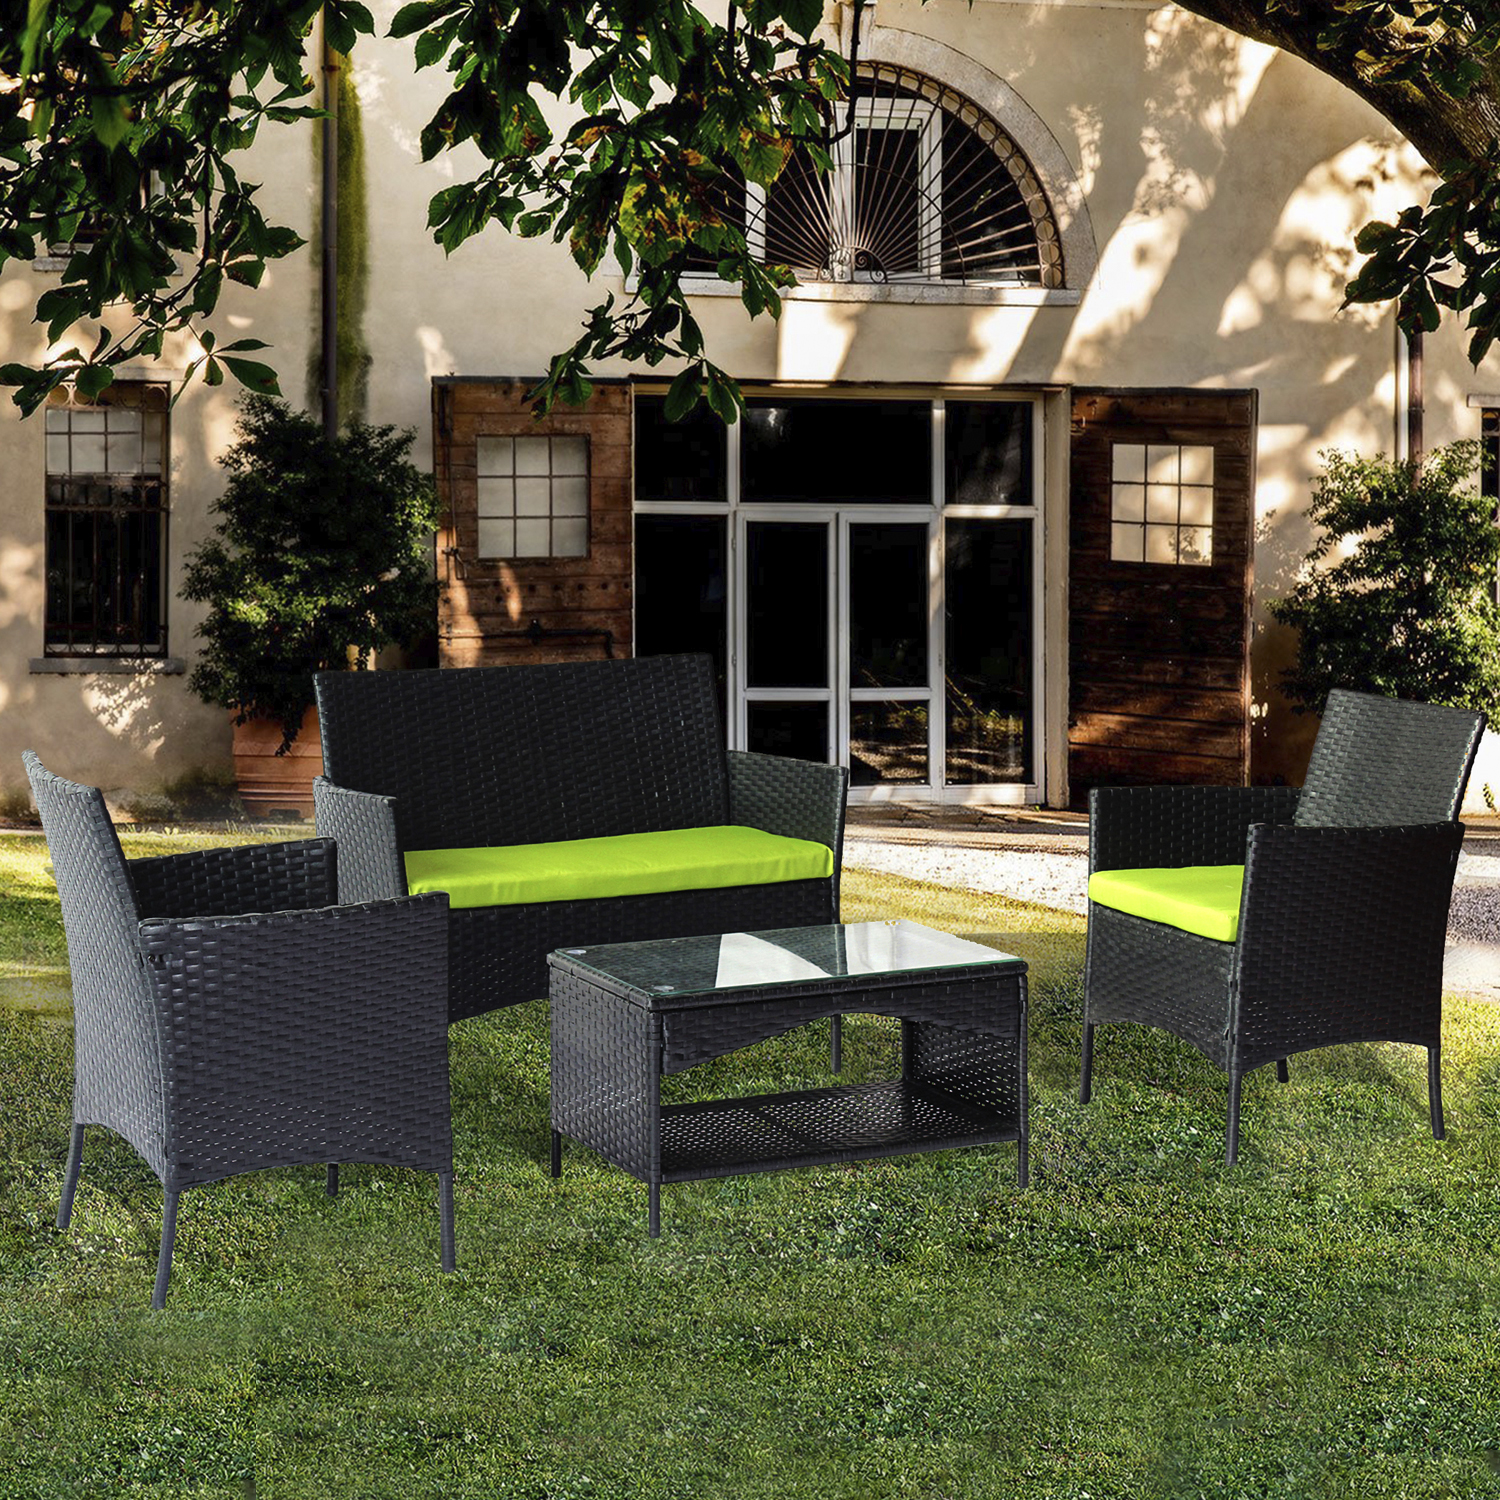 Uhomepro 4 Piece Bistro Patio Set, Rattan Wicker Outdoor Patio Furniture with 2pcs Arm Chairs, 1pc Love Seat, Coffee Table, Green Cushion, Dining for Backyard Poolside Garden - image 3 of 8